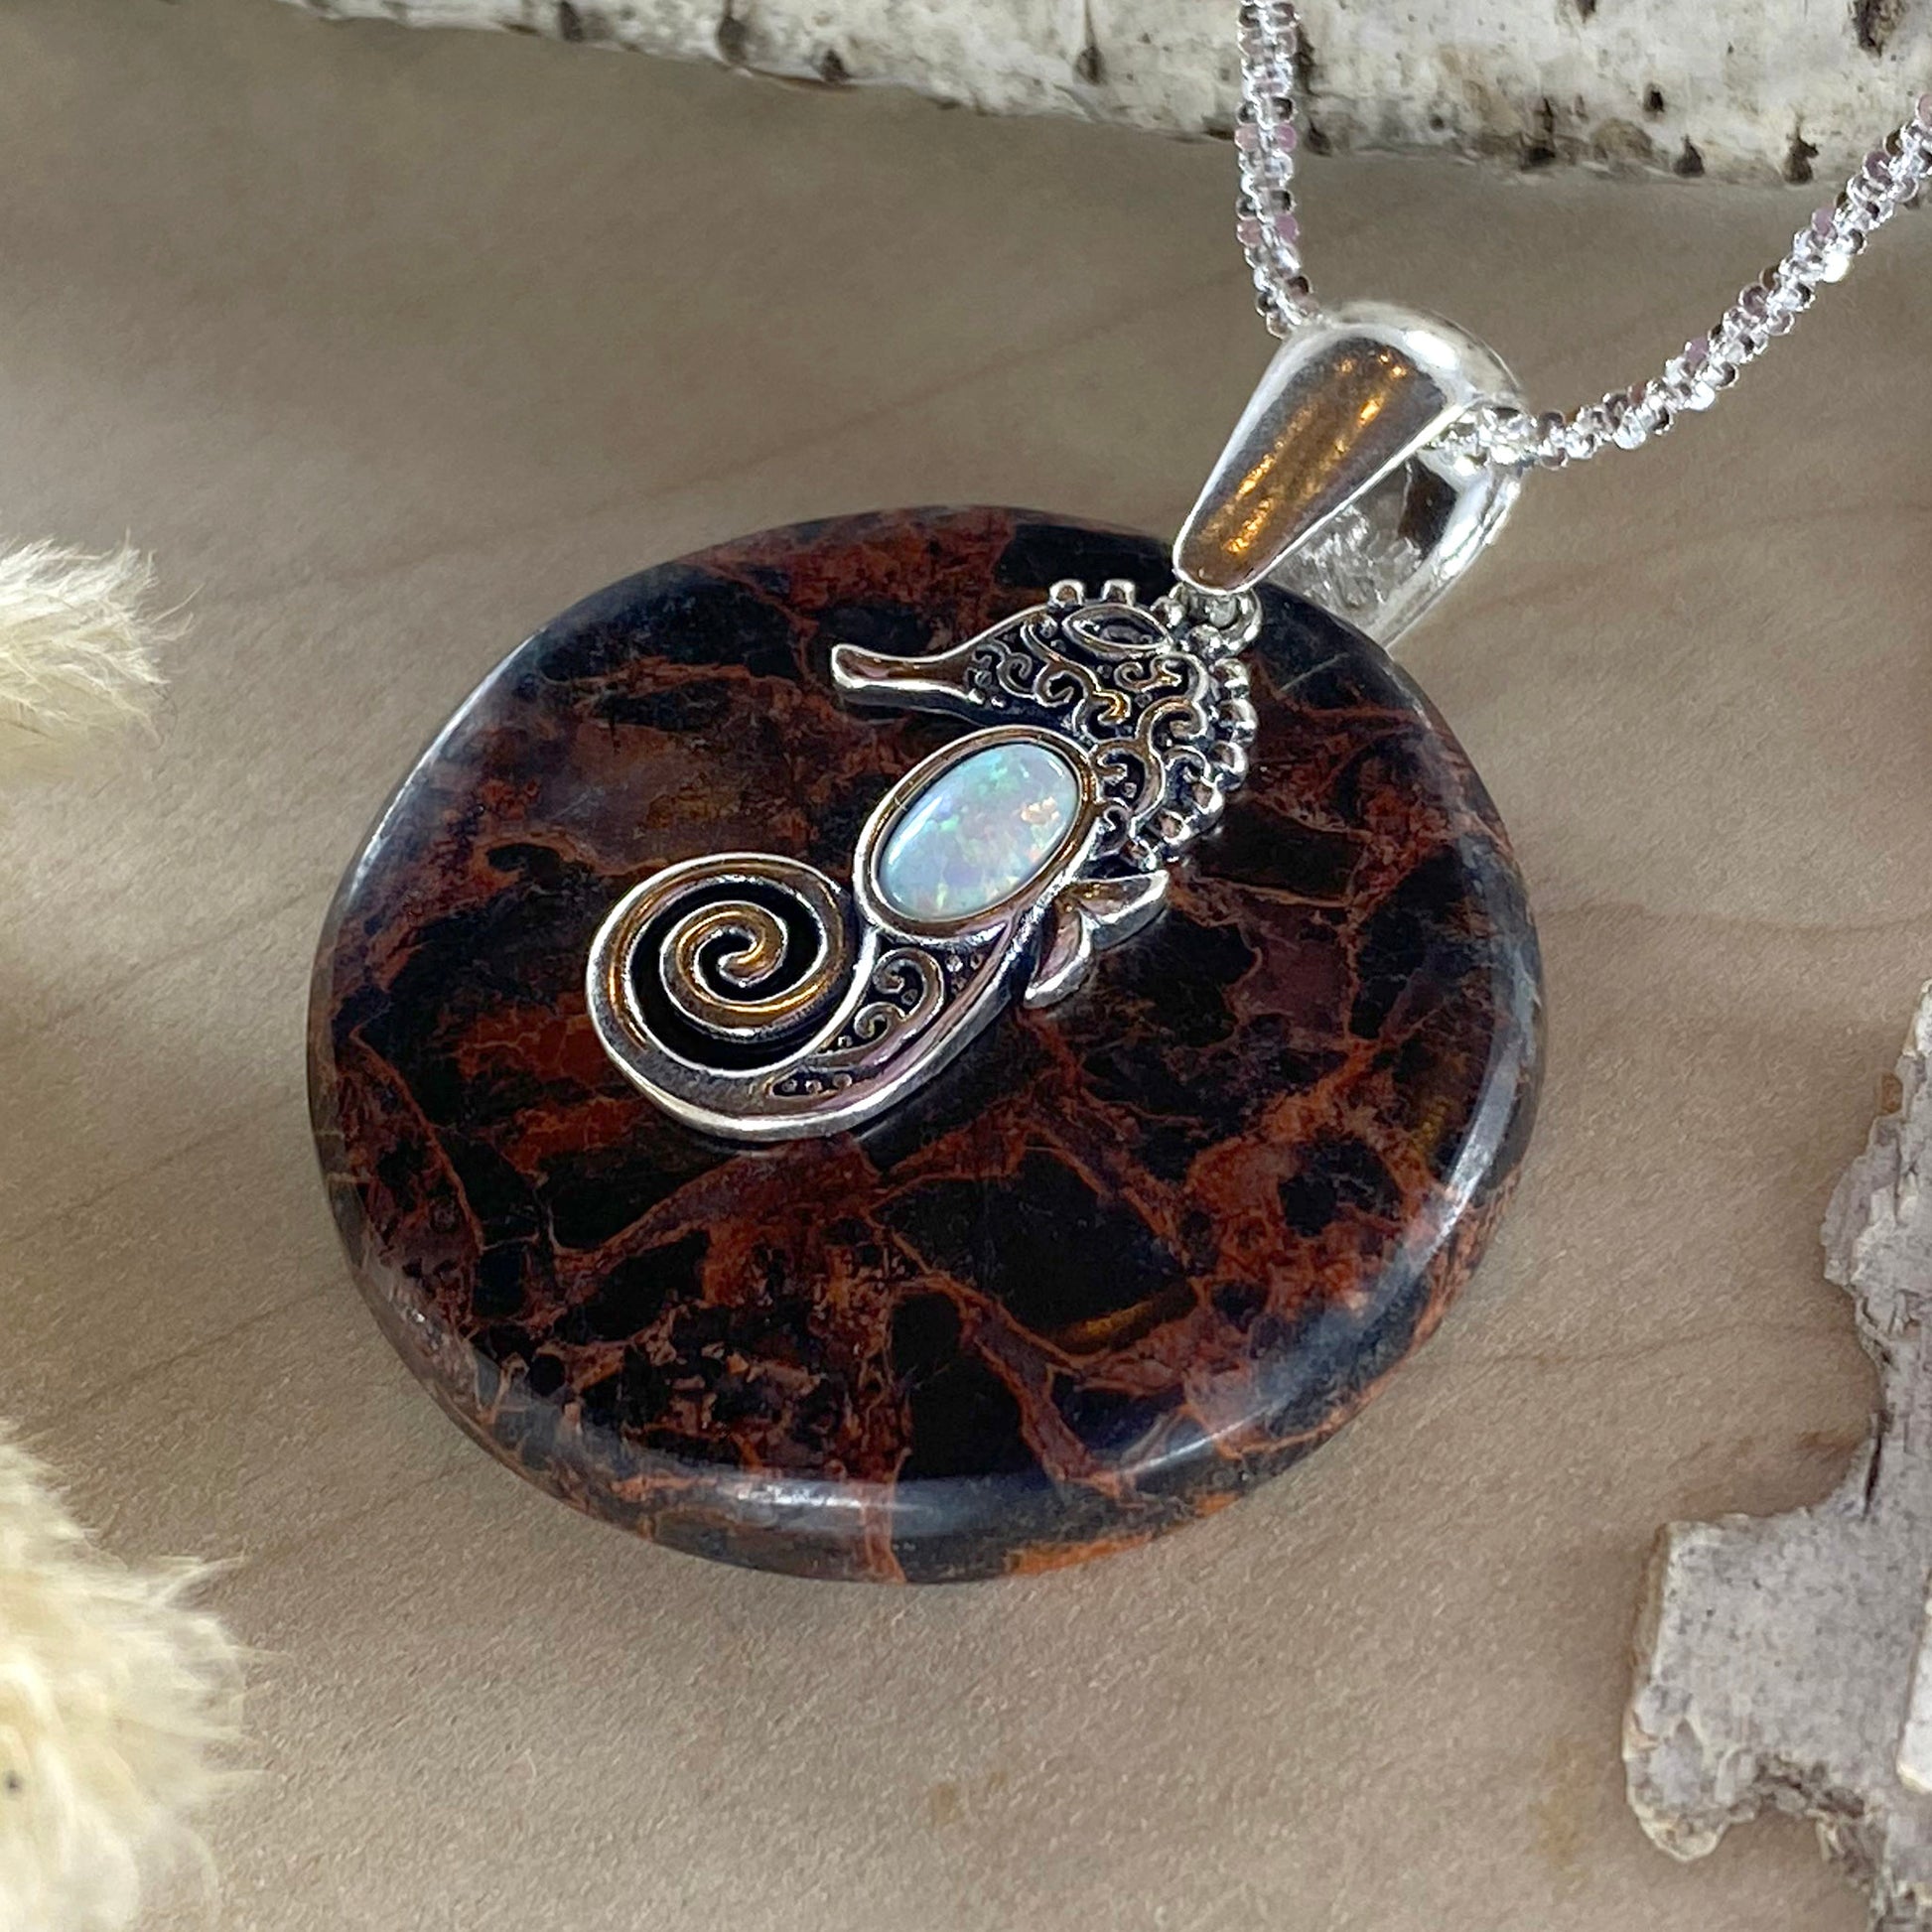 Painted Valley Agate Pendant Necklace - Stone Treasures by the Lake